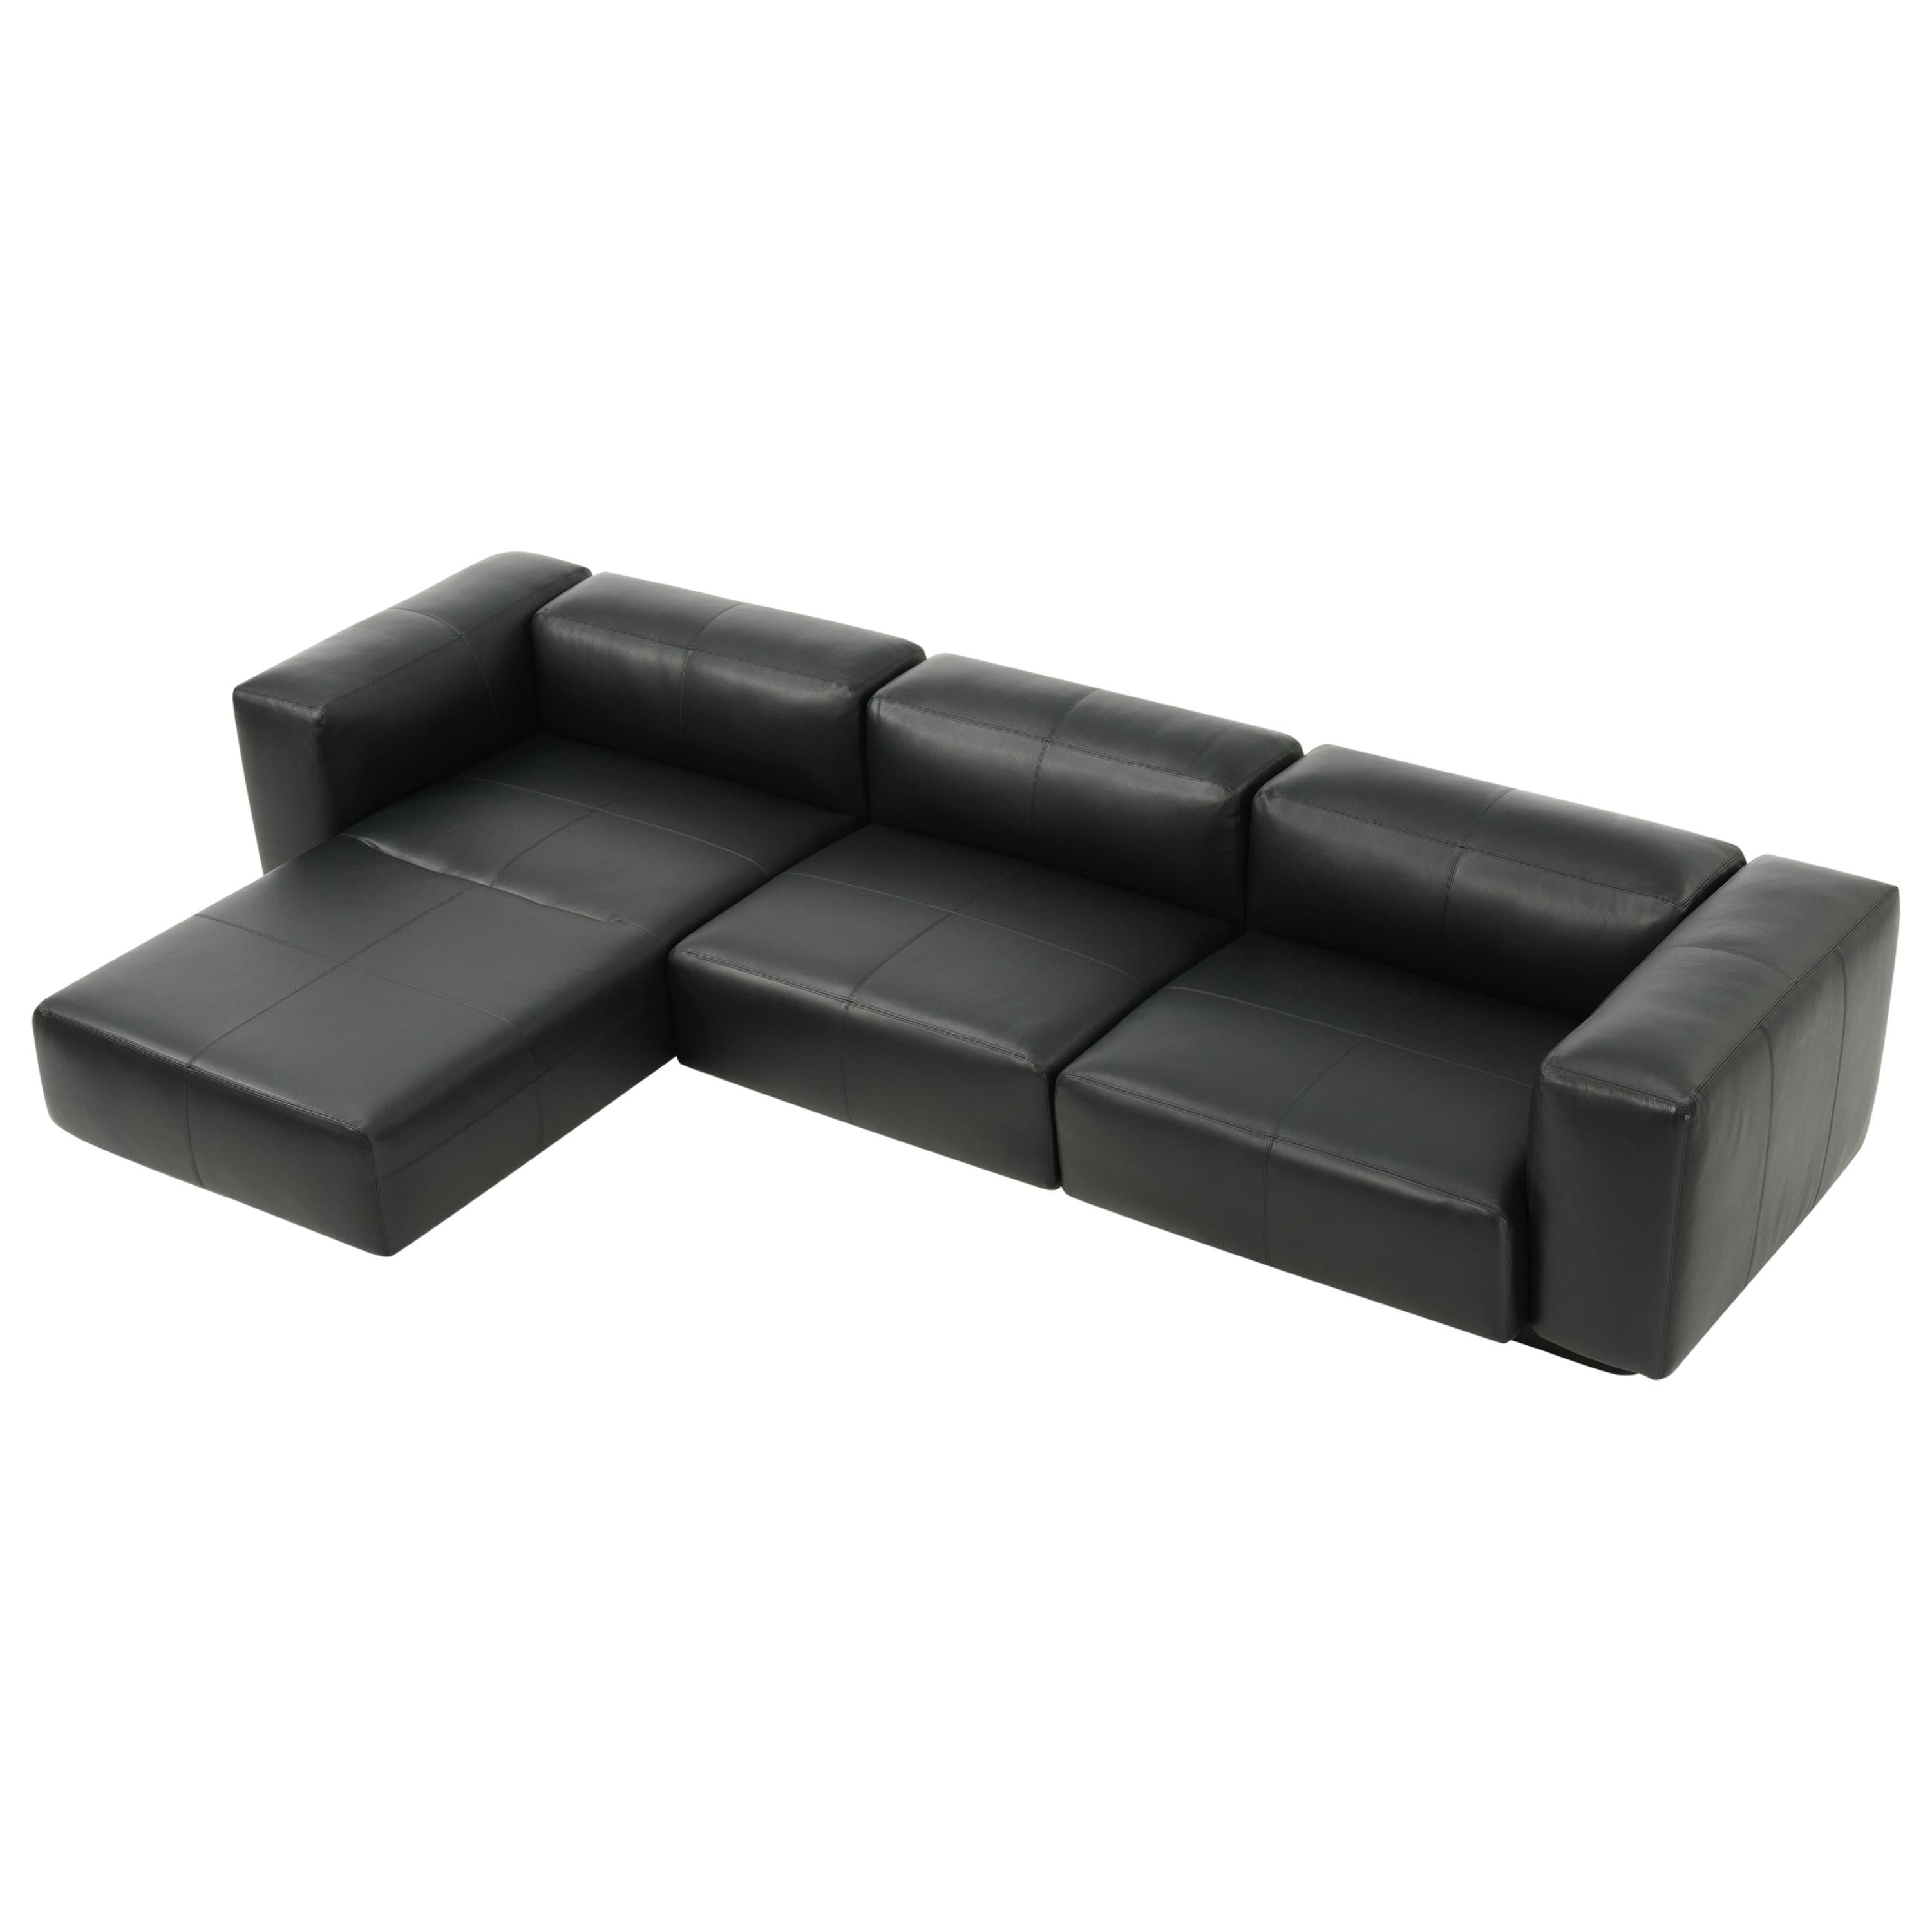 Vitra Soft Modular 3-Seat Sofa with Chaise in Nero Leather by Jasper Morrison For Sale